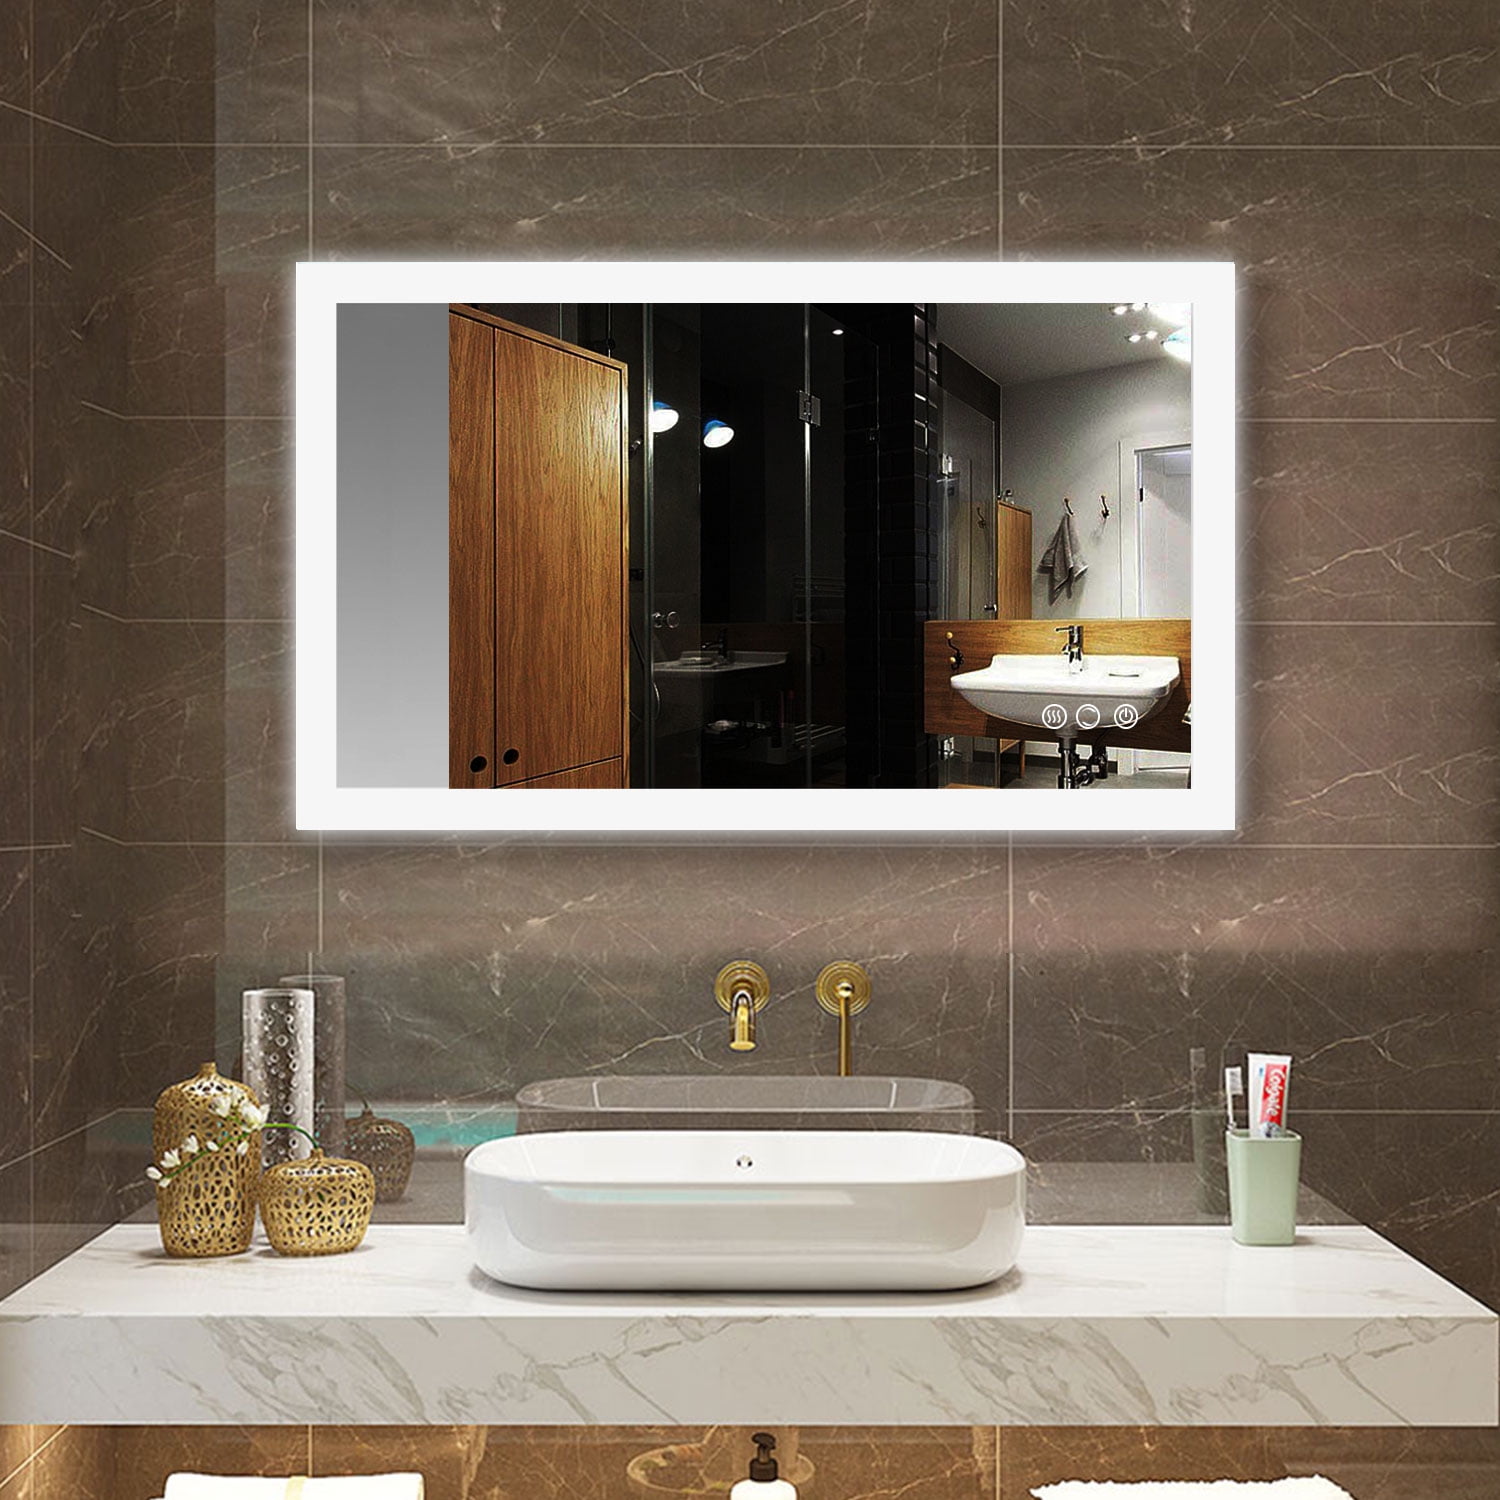 Details about   XX-Large LED Illuminated Wall Bathroom Makeup Mirror Demister Vertical Magnifier 